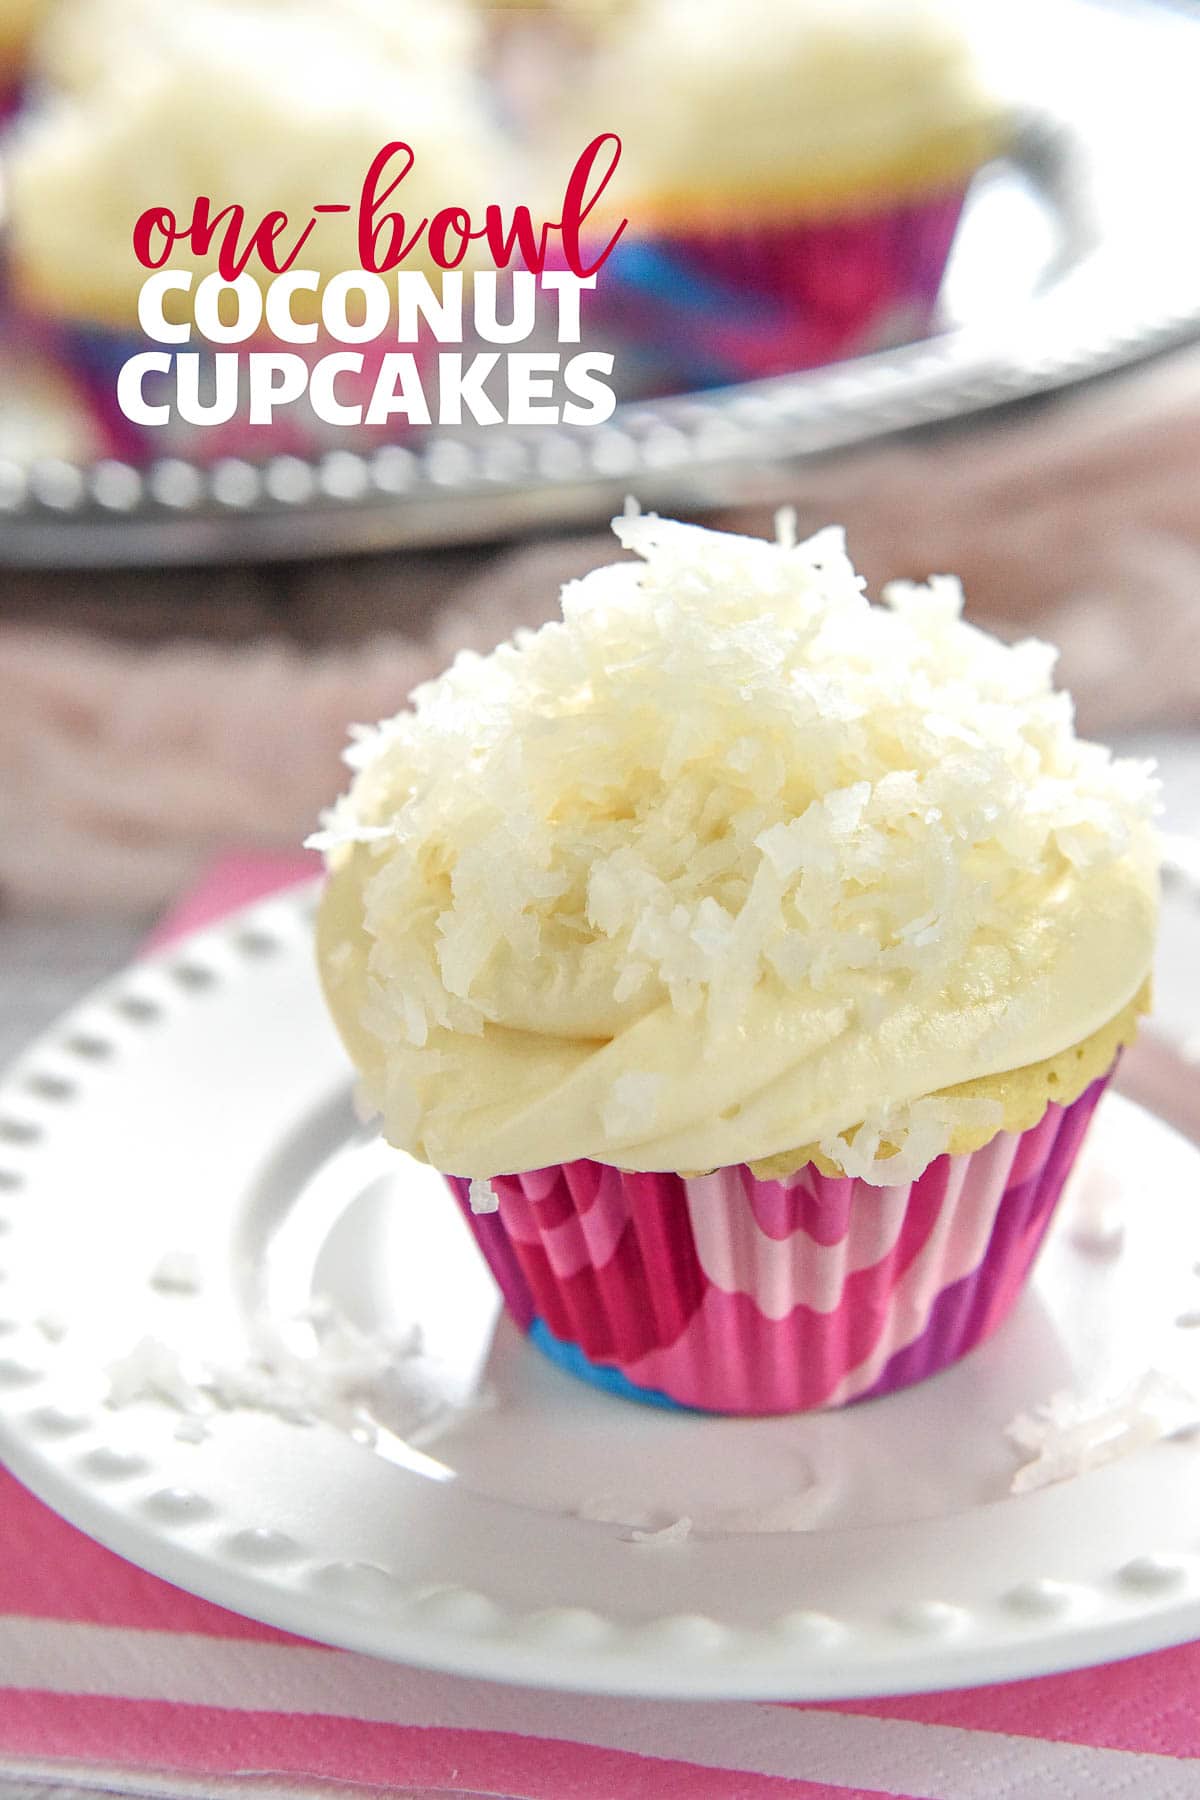 One bowl Coconut Cupcakes with text overlay.